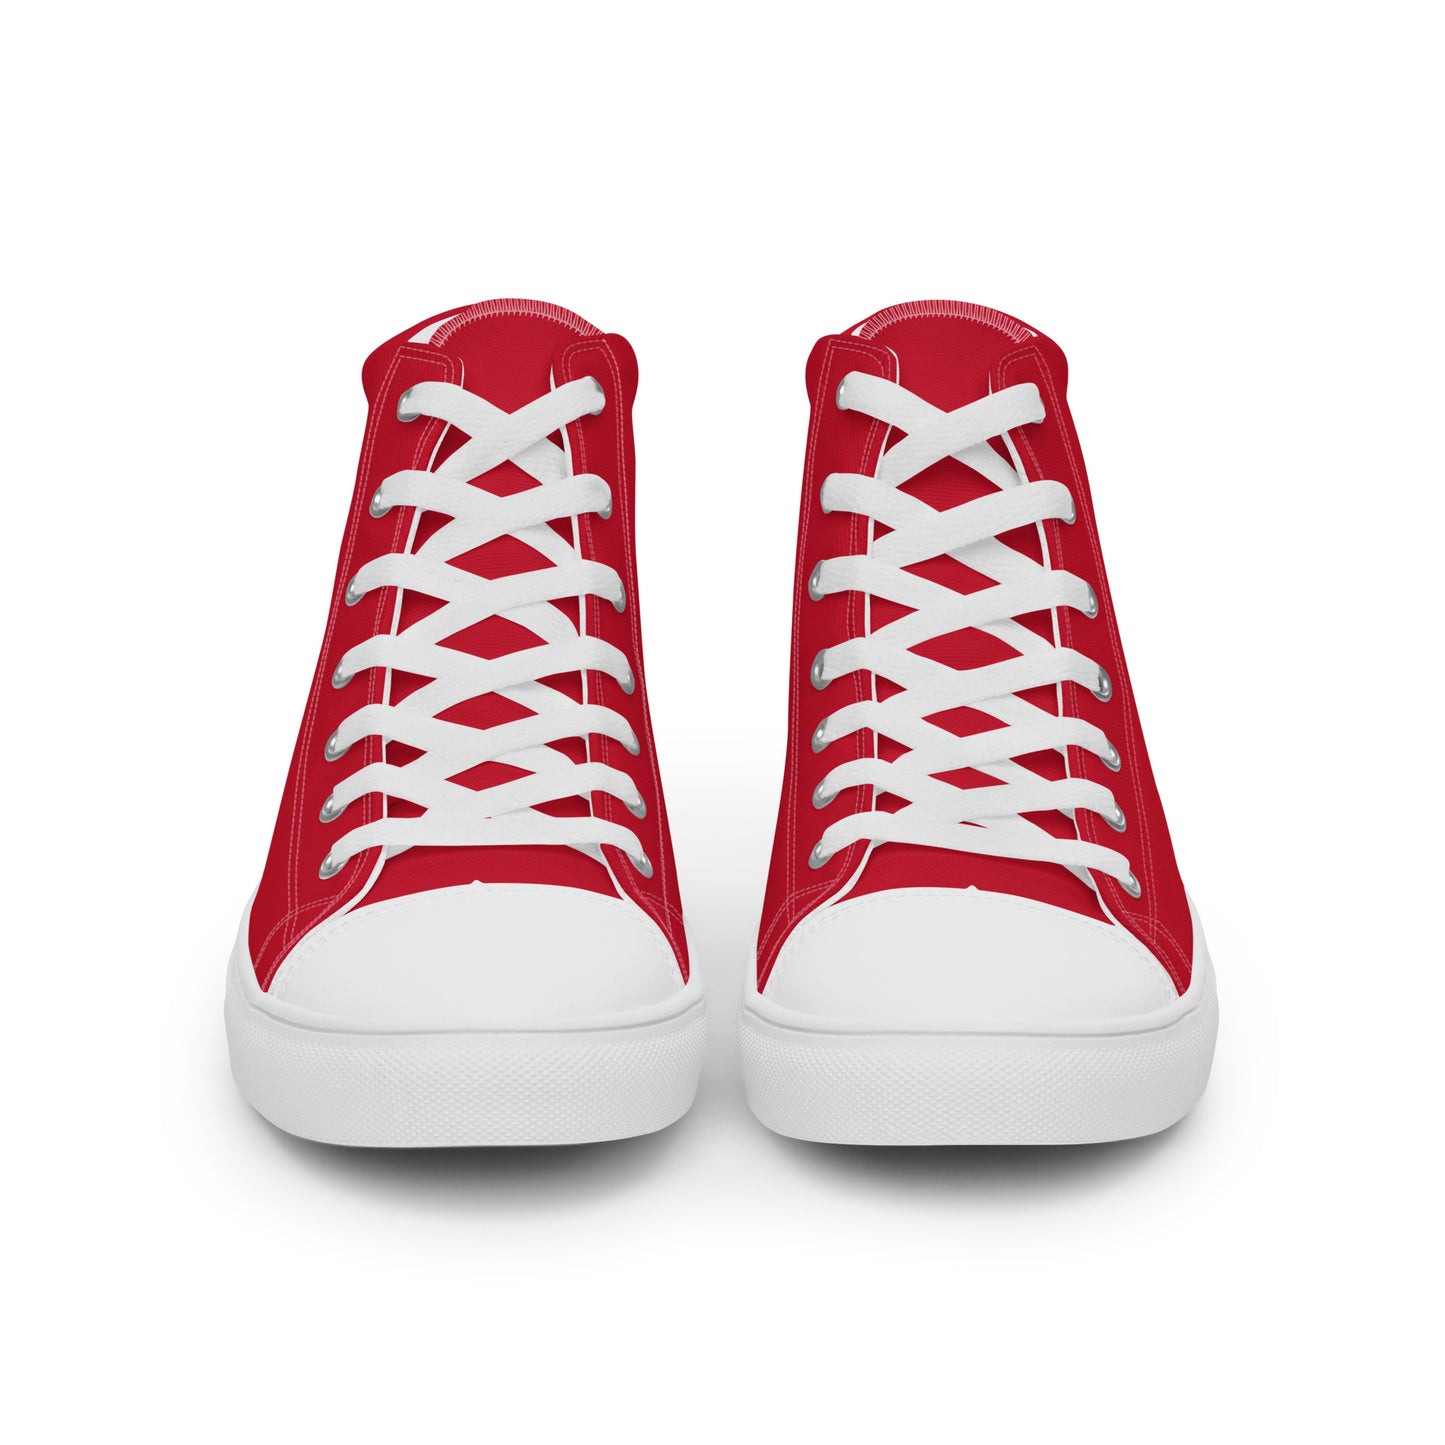 Costa Rica - Women - Red - High top shoes